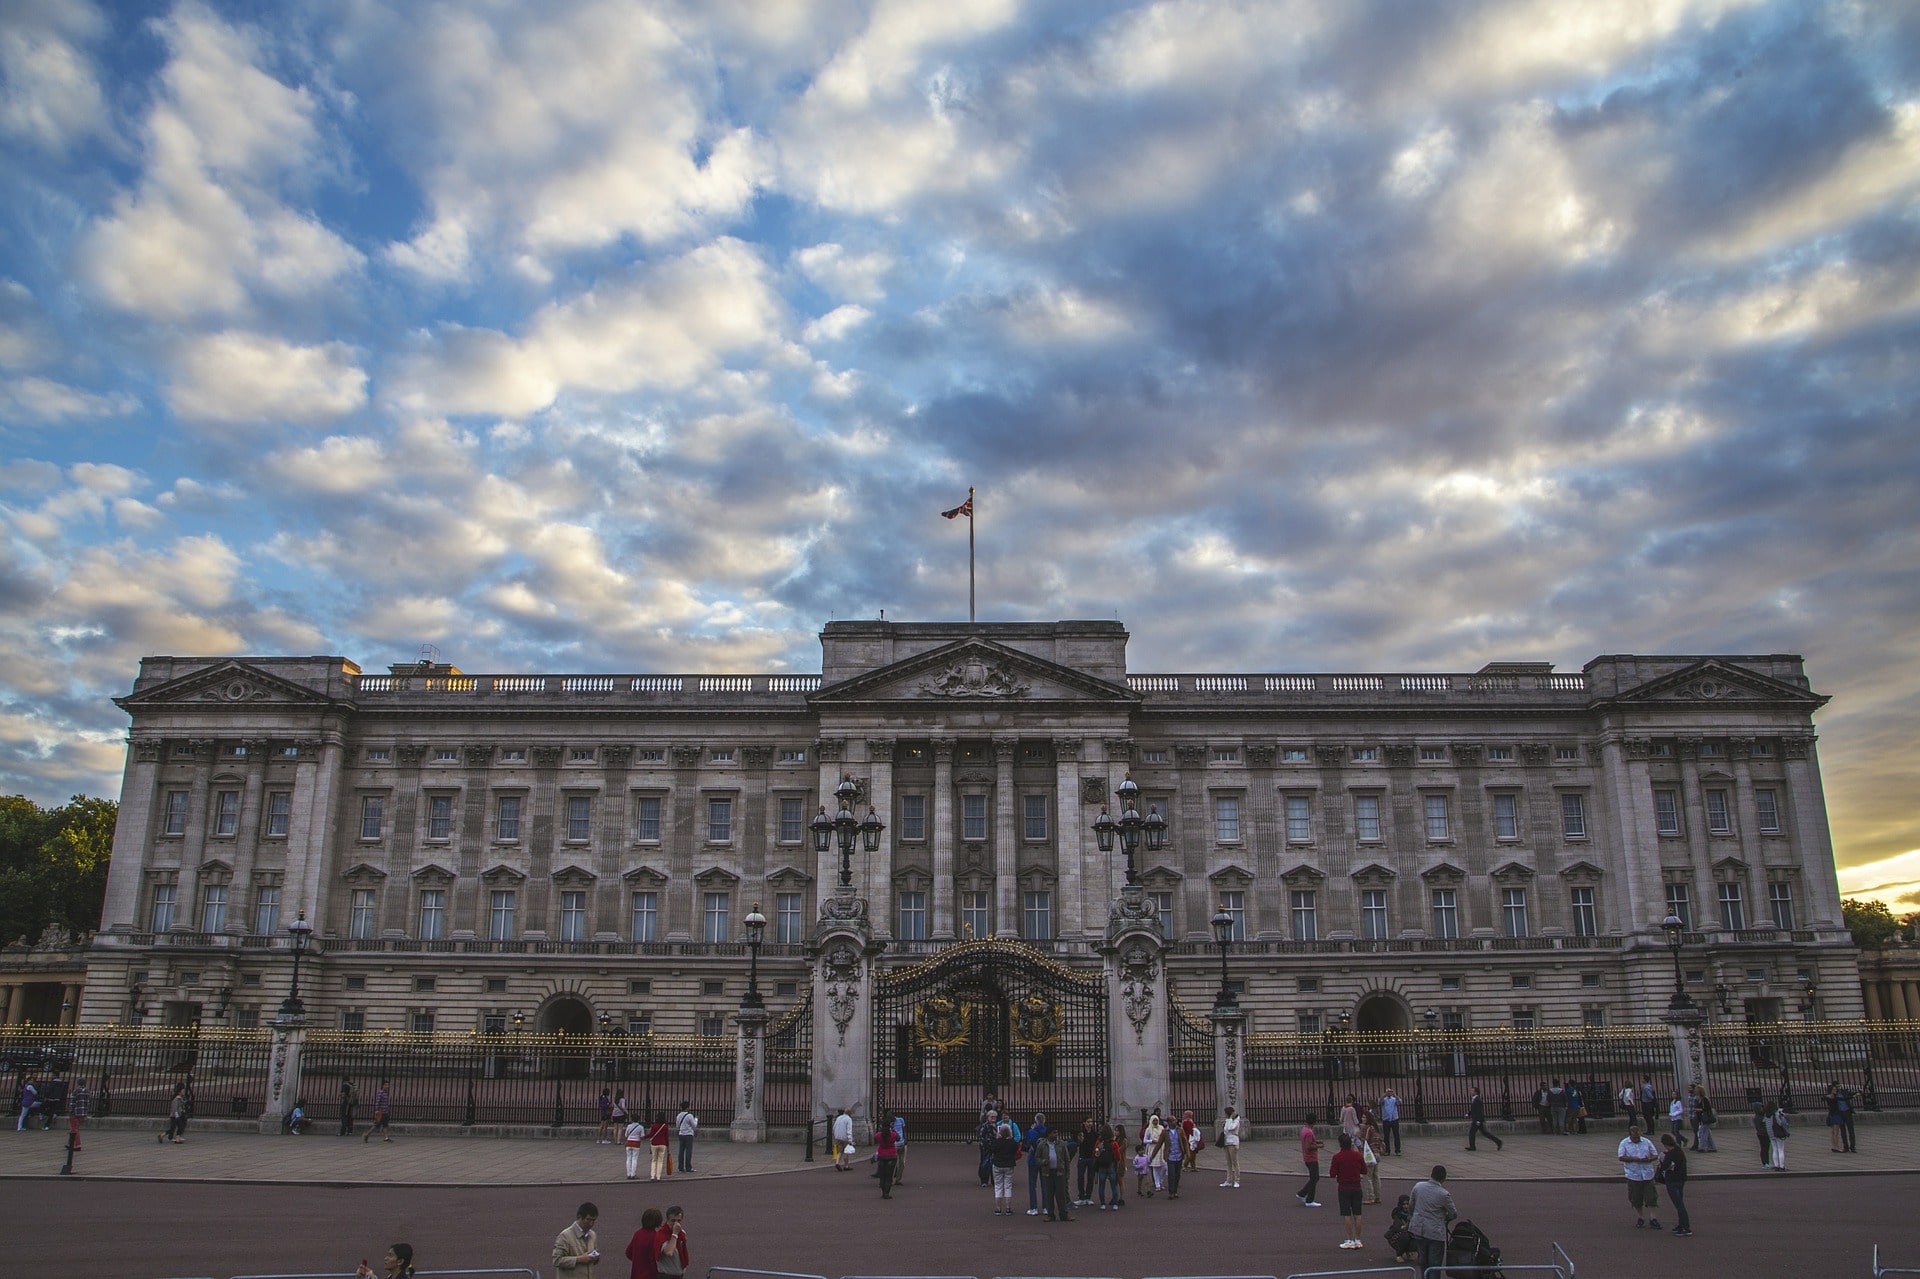 The regal Buckingham Palace is an awesome place to visit in London